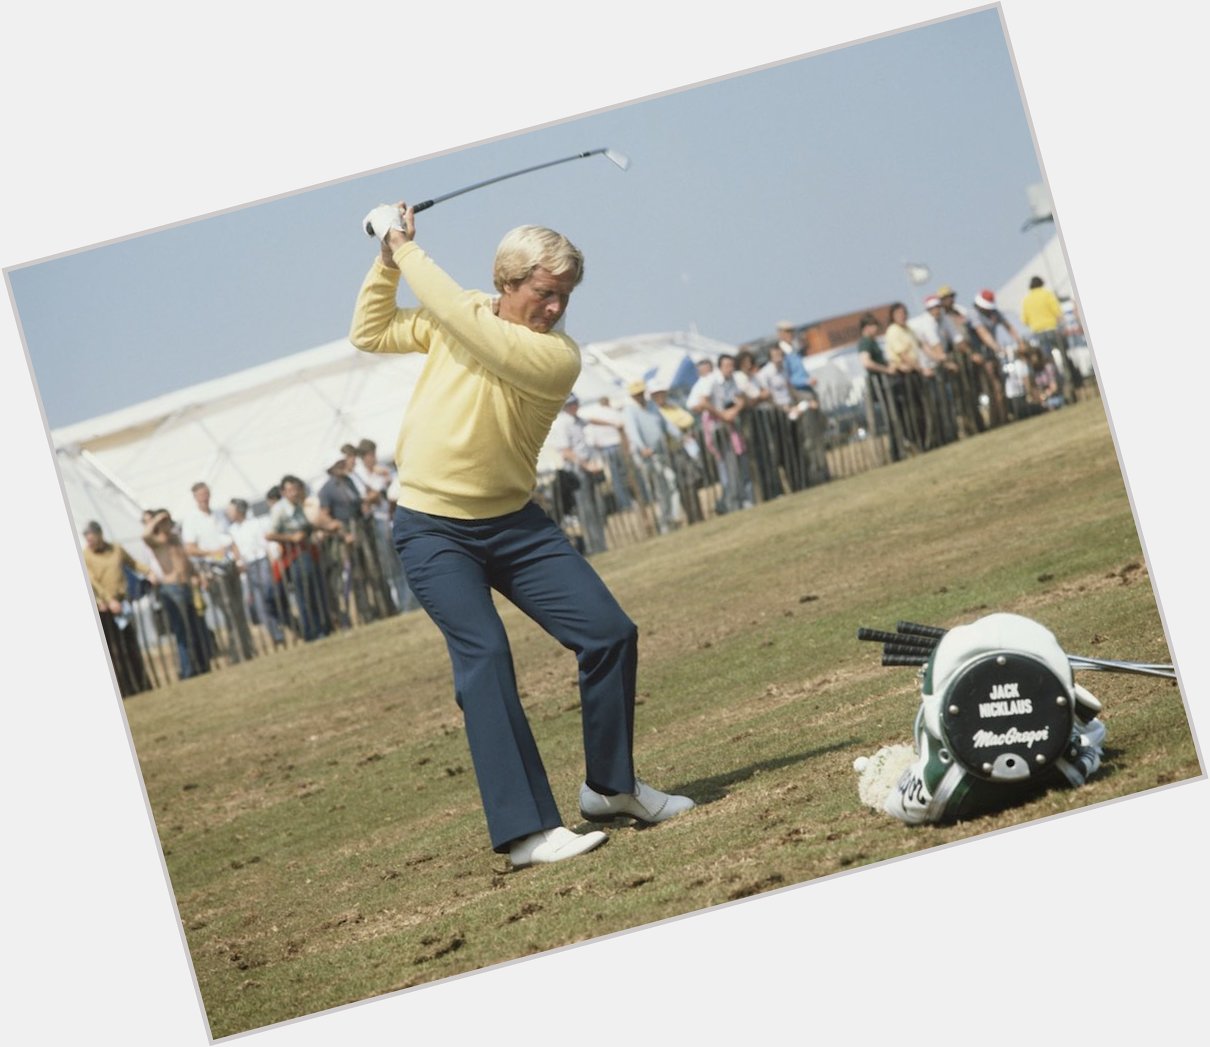 One of the greatest to ever tee it up.

Happy birthday to The Golden Bear, Jack Nicklaus. Pay homage. 